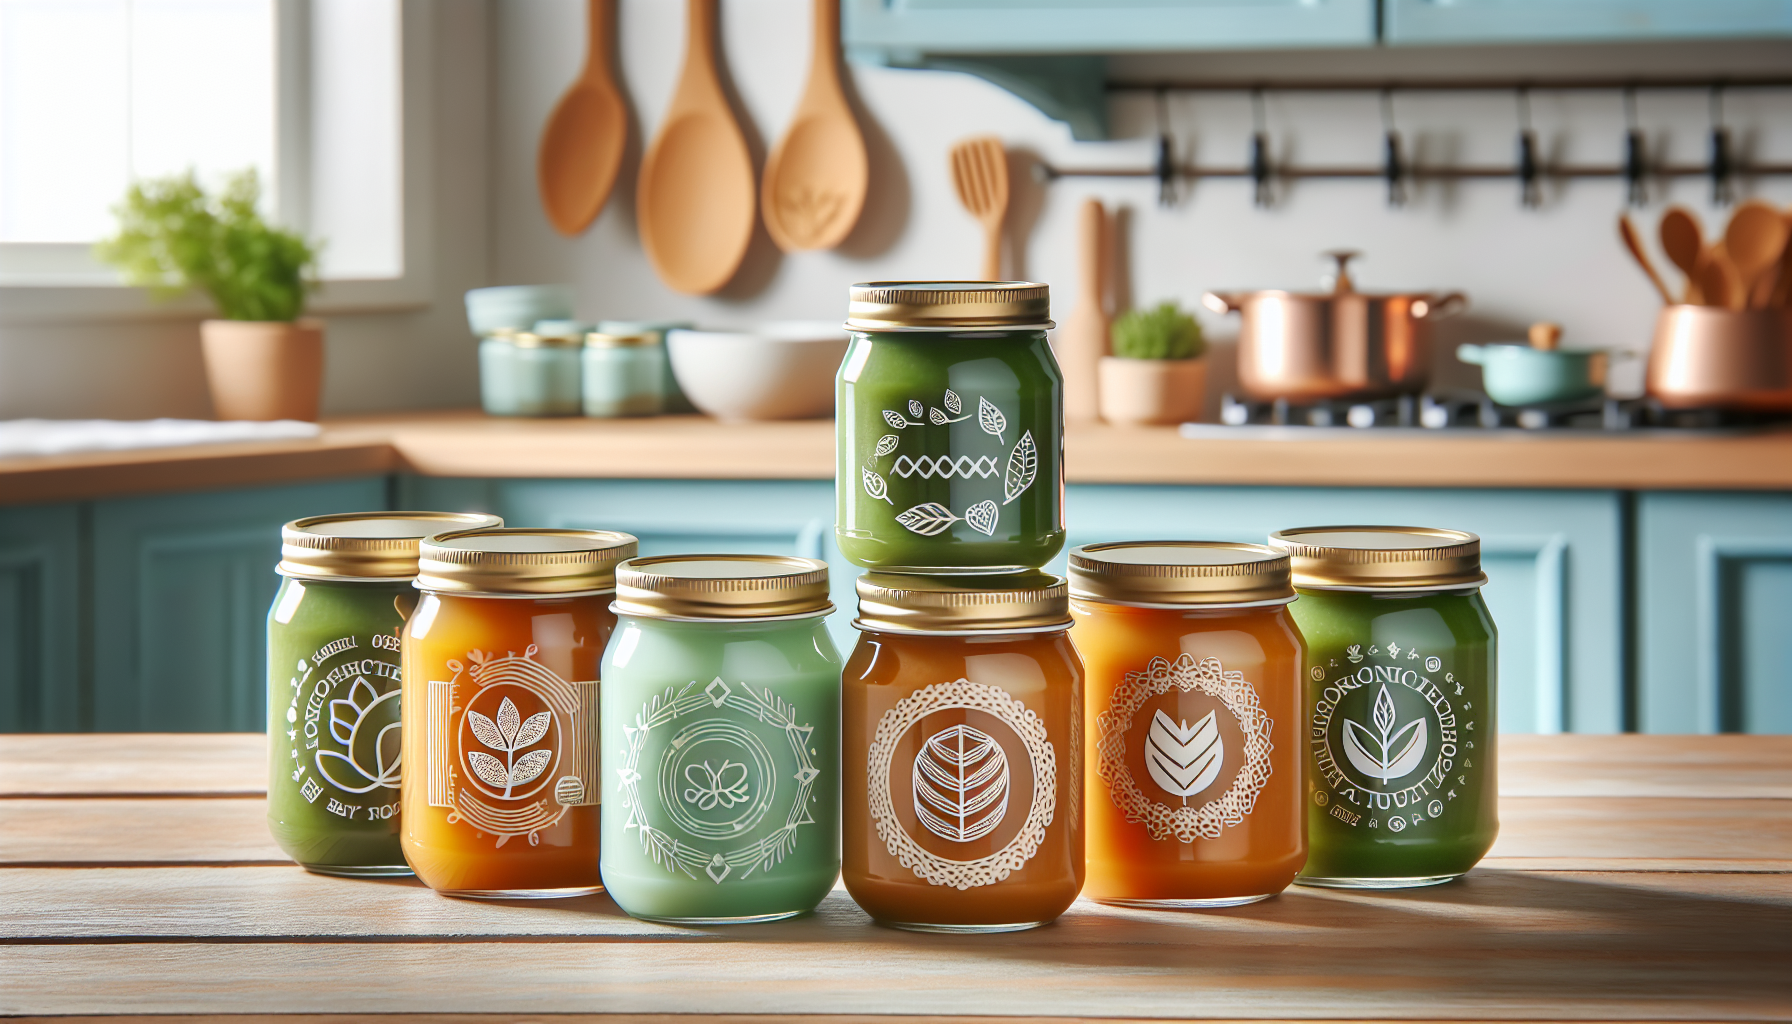 Quality and safety certifications for organic baby food